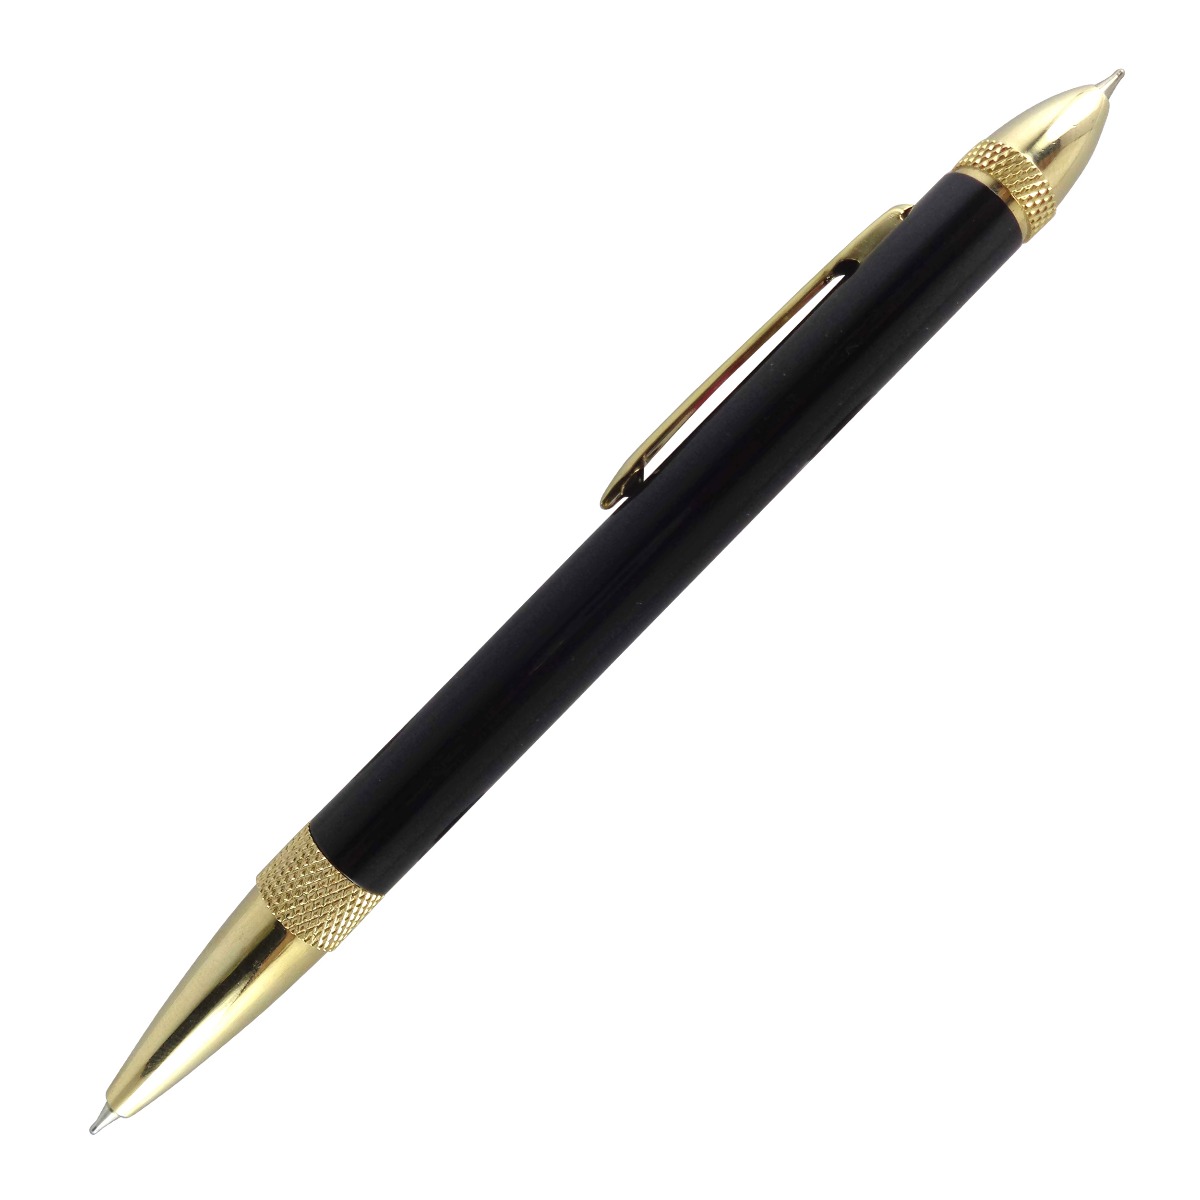 Oliver double Model: 15124 Black color body with golden color clip assorted color fine tip ball pen